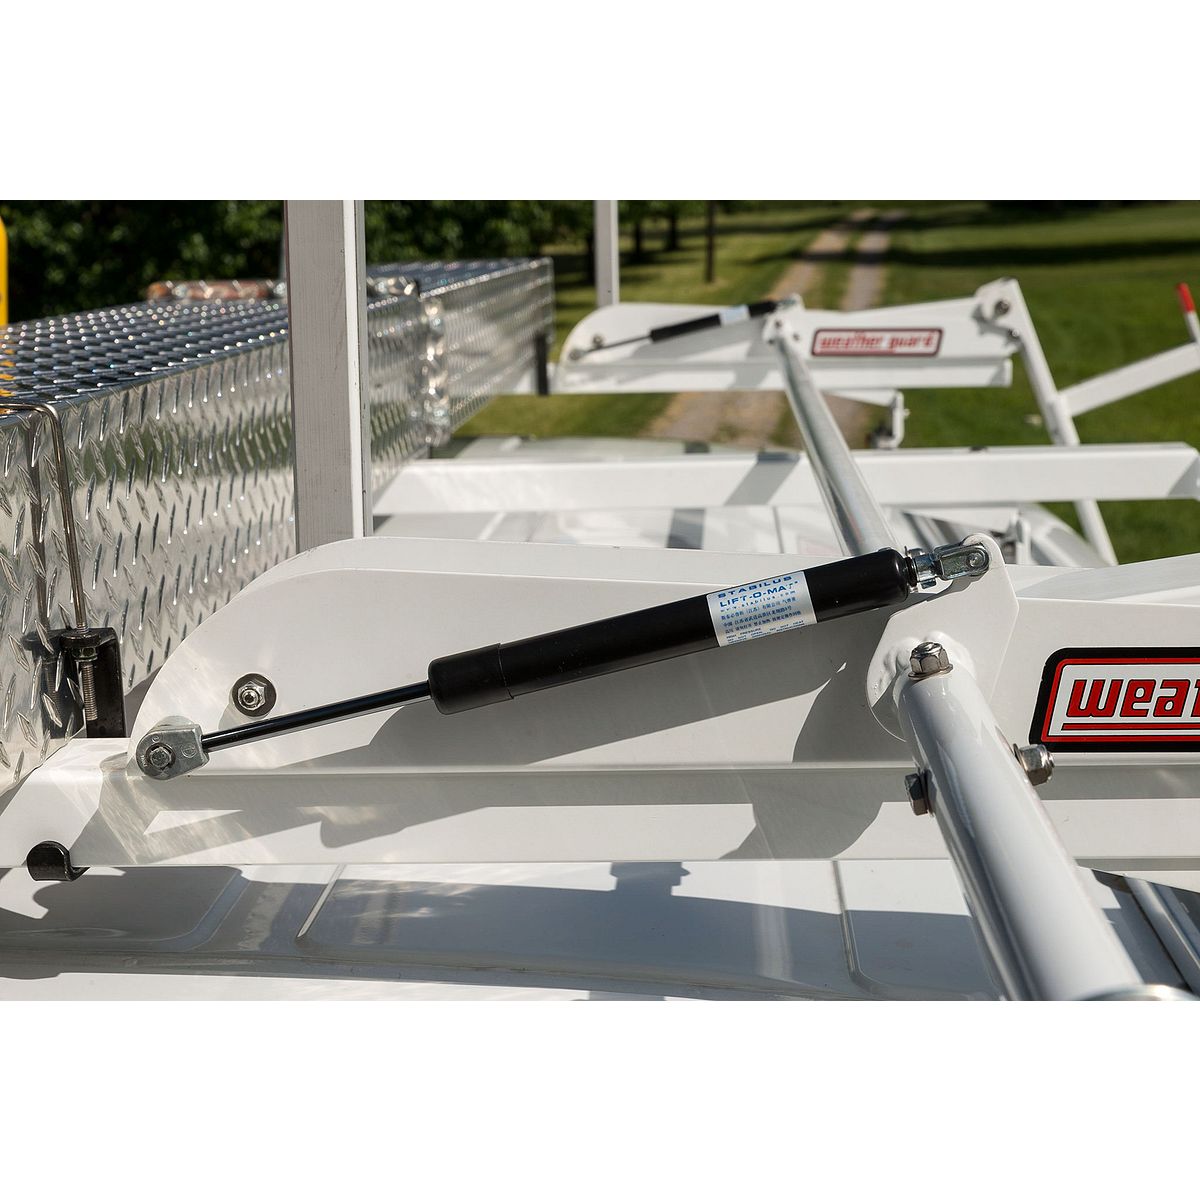 Weather Guard EZGLIDE2™ Fixed Drop-Down Ladder Rack, #2261-3-01